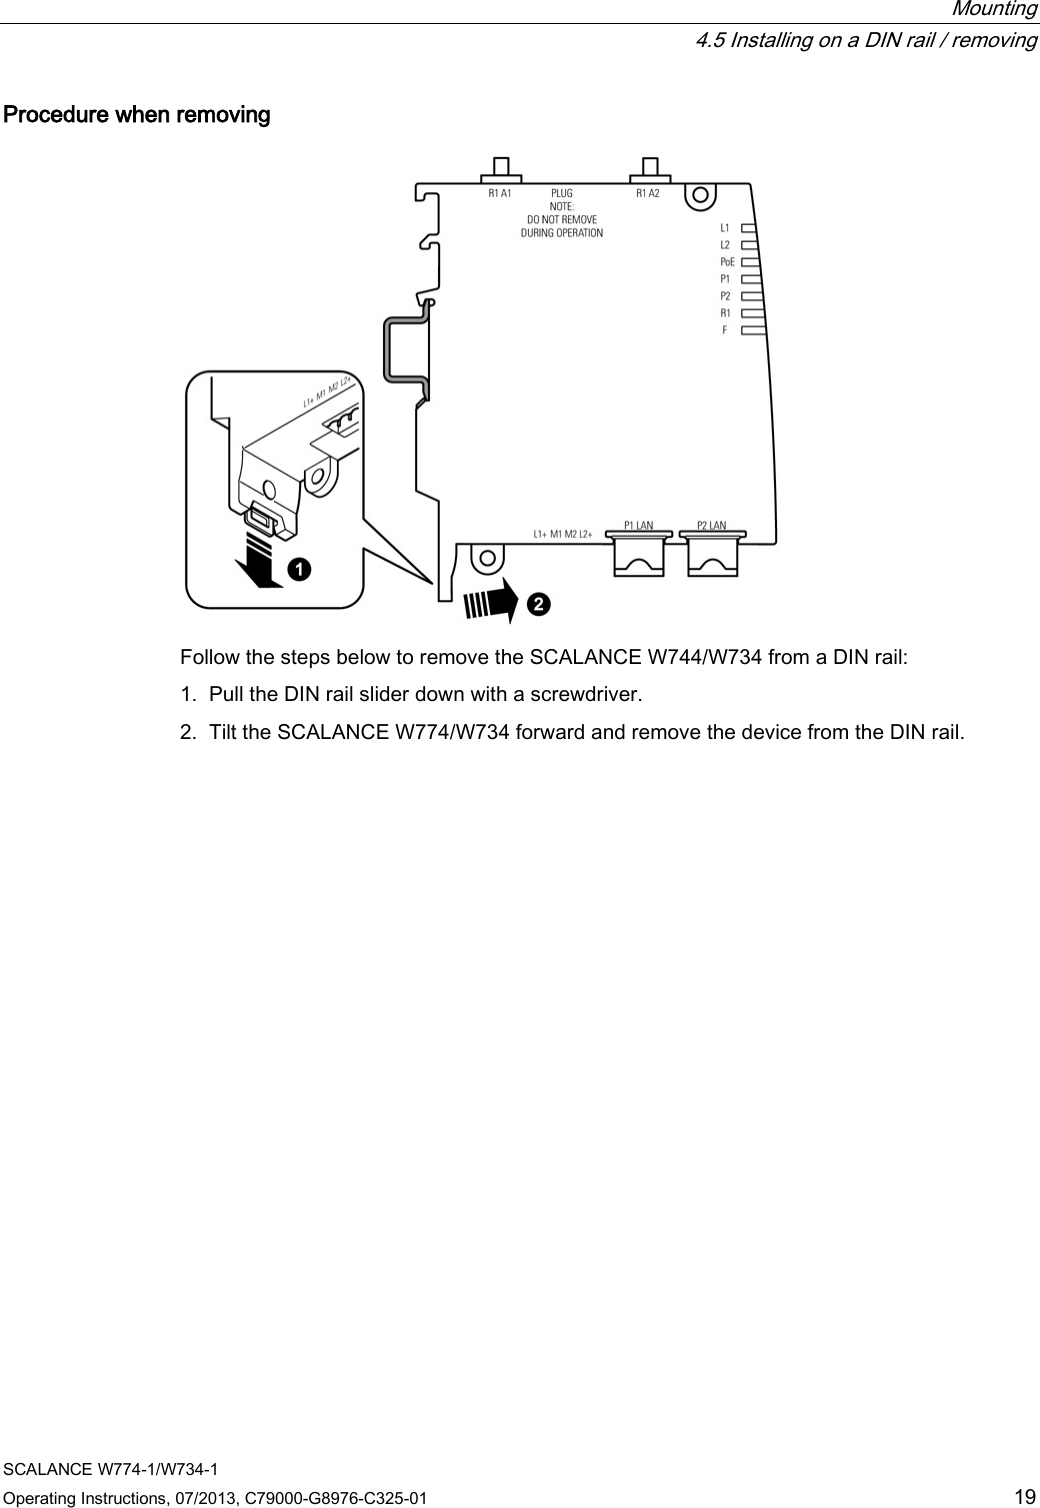  Mounting  4.5 Installing on a DIN rail / removing SCALANCE W774-1/W734-1 Operating Instructions, 07/2013, C79000-G8976-C325-01 19 Procedure when removing  Follow the steps below to remove the SCALANCE W744/W734 from a DIN rail: 1. Pull the DIN rail slider down with a screwdriver. 2. Tilt the SCALANCE W774/W734 forward and remove the device from the DIN rail. 